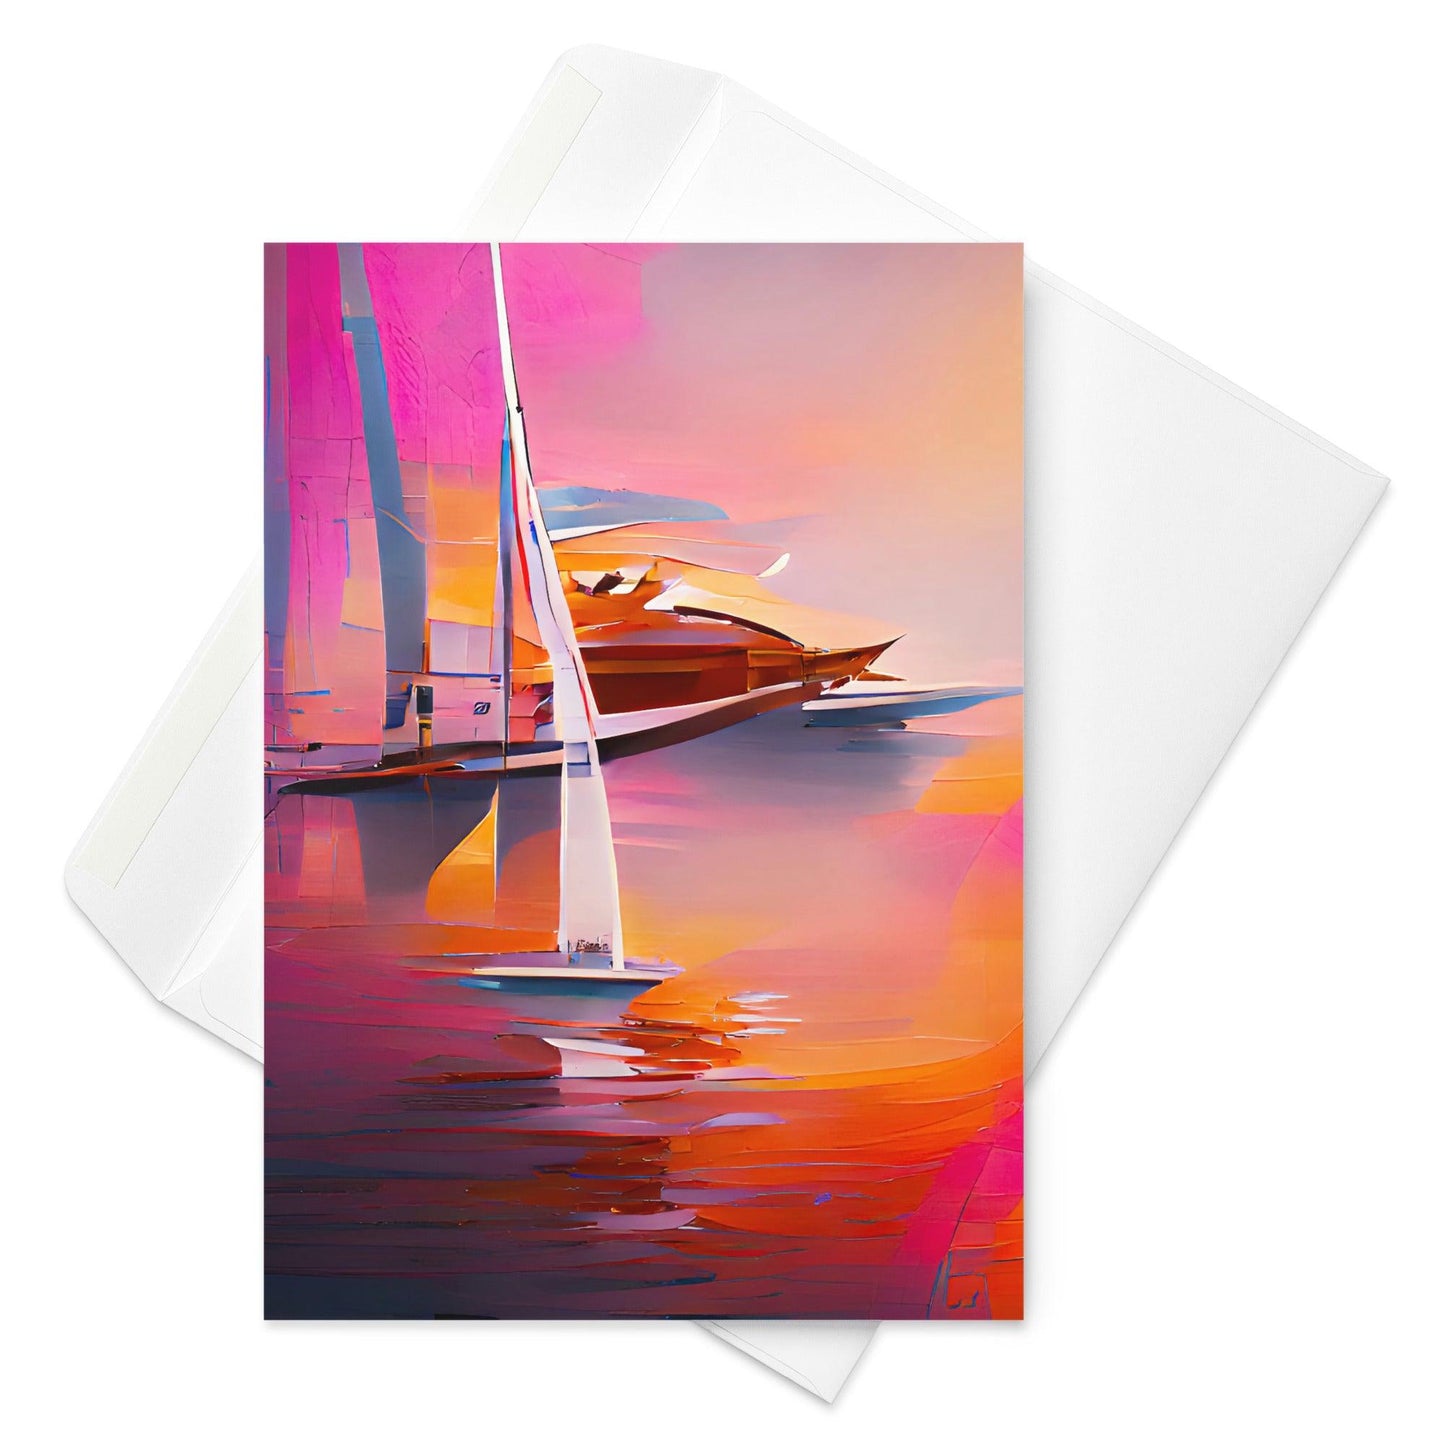 Seaclusion - Note Card - iSAW Company